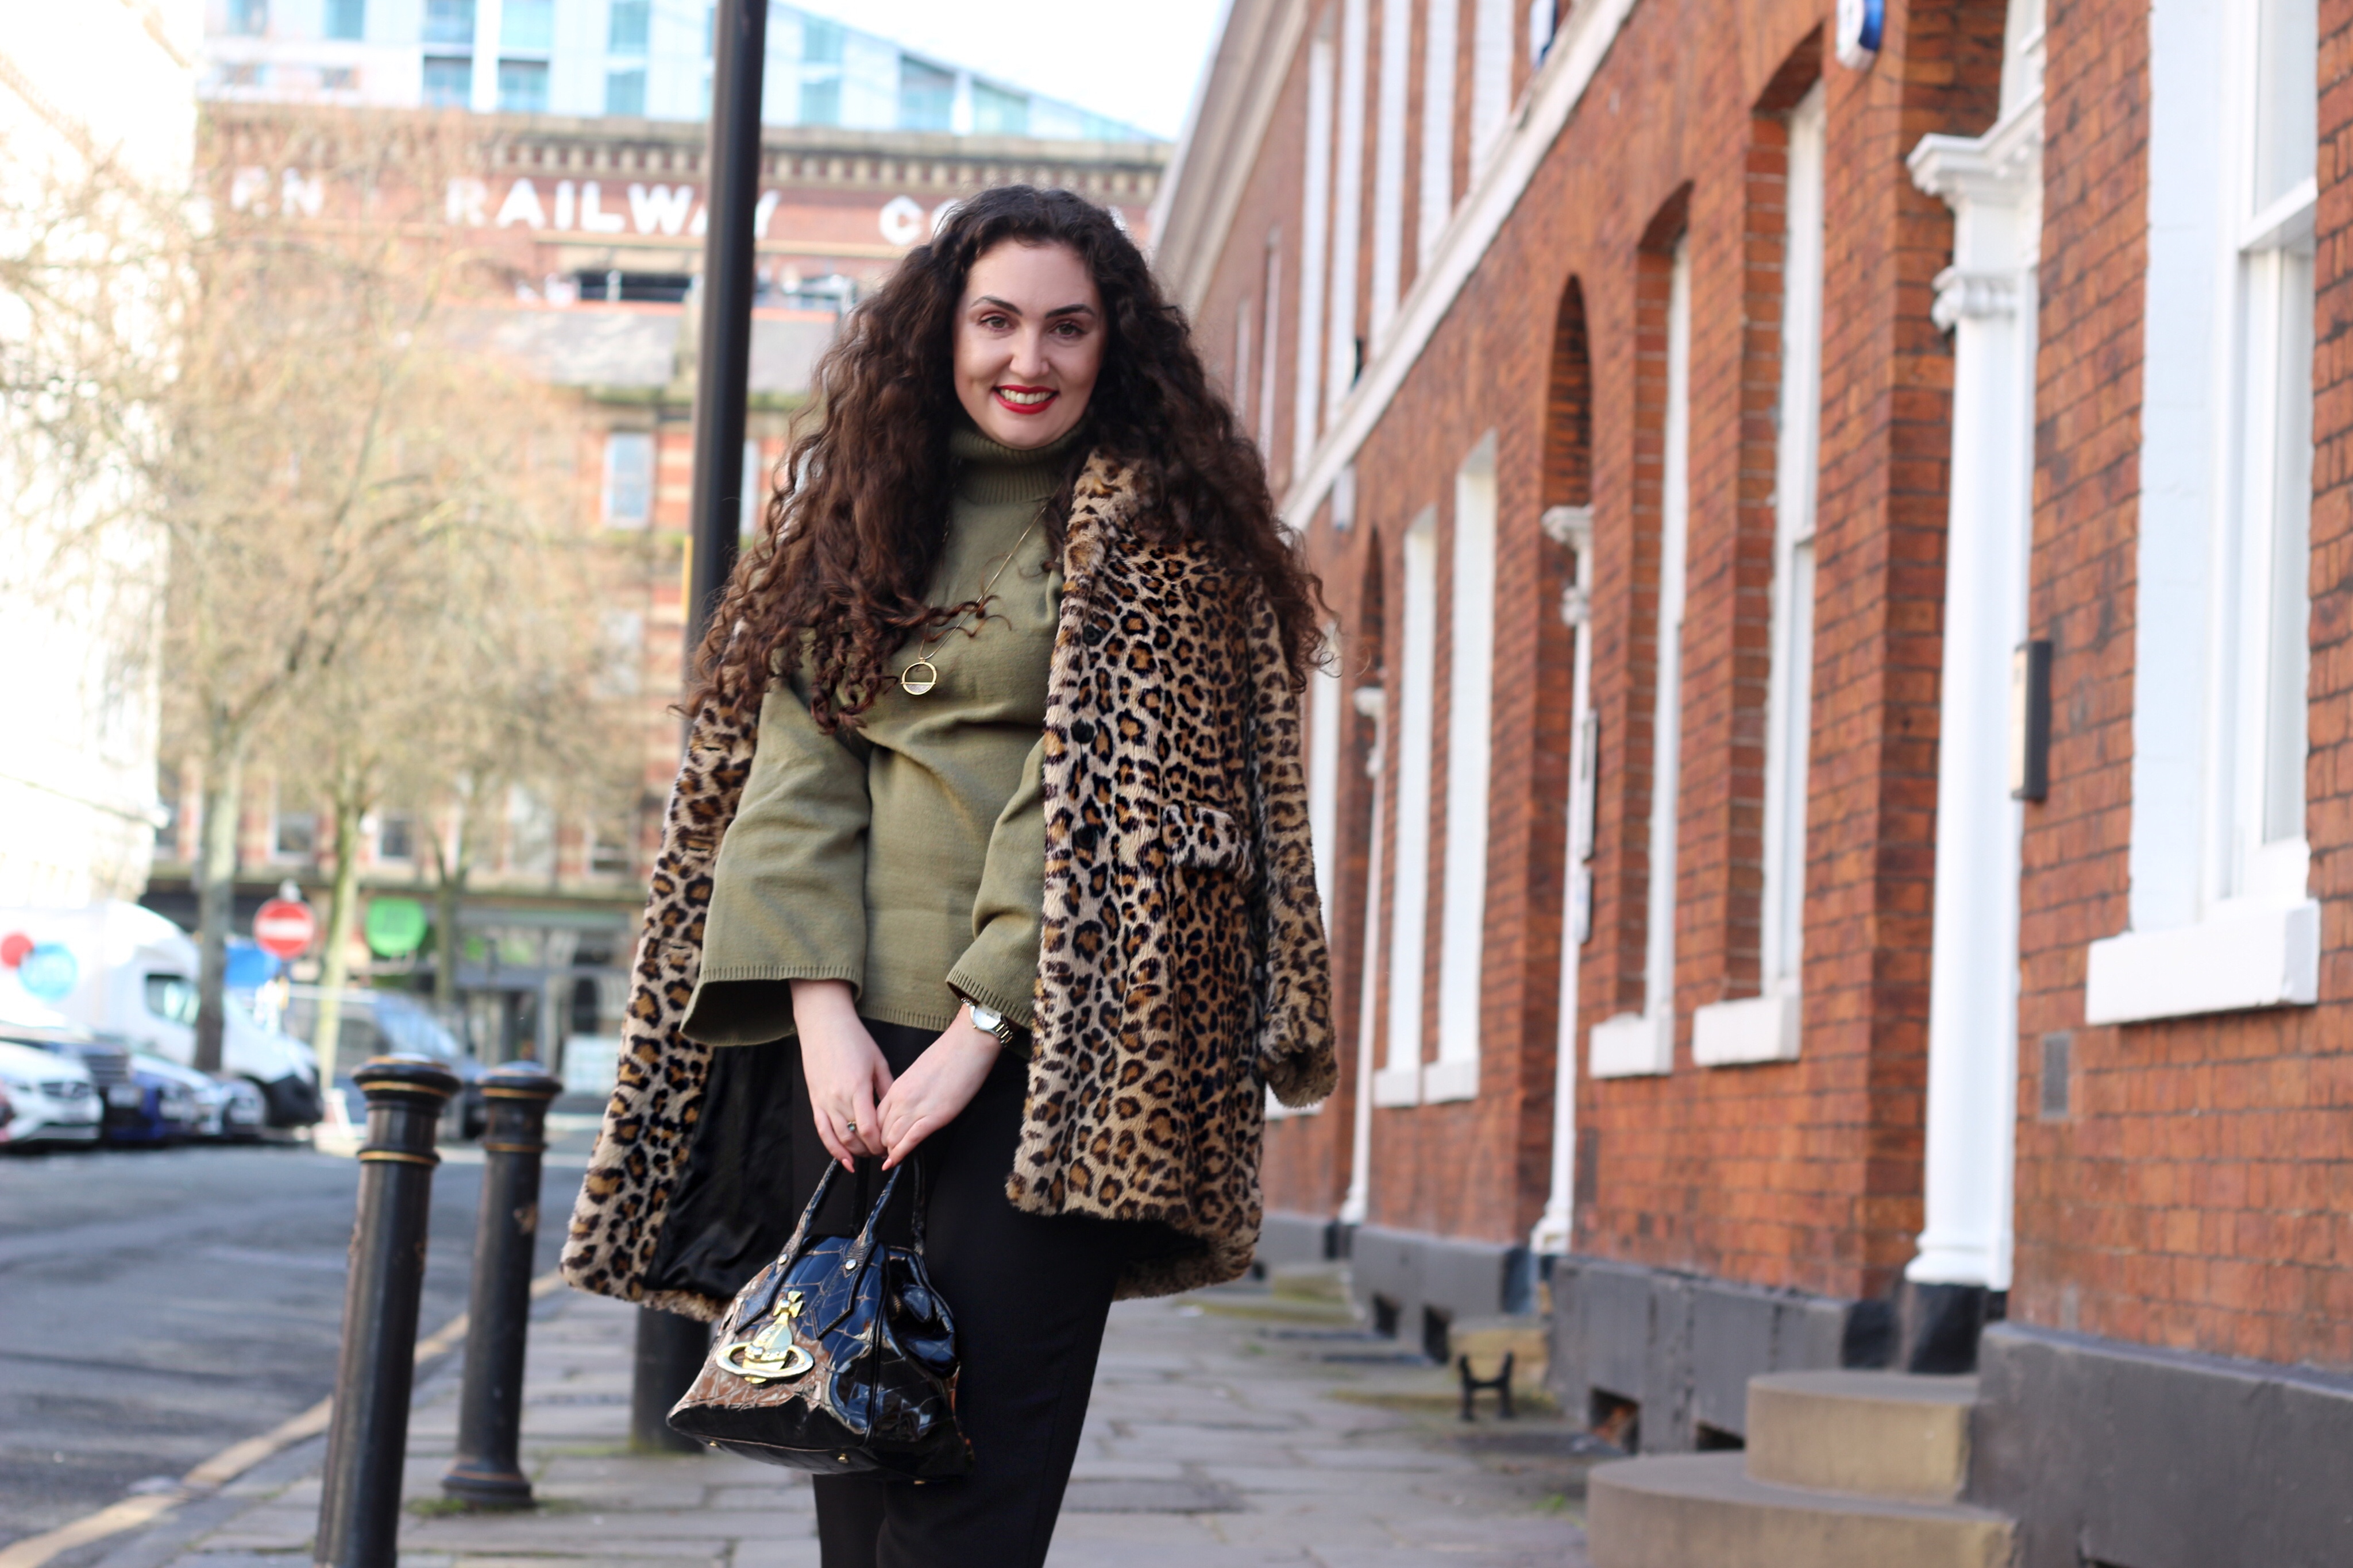 leopard print details and khaki outfit of the day